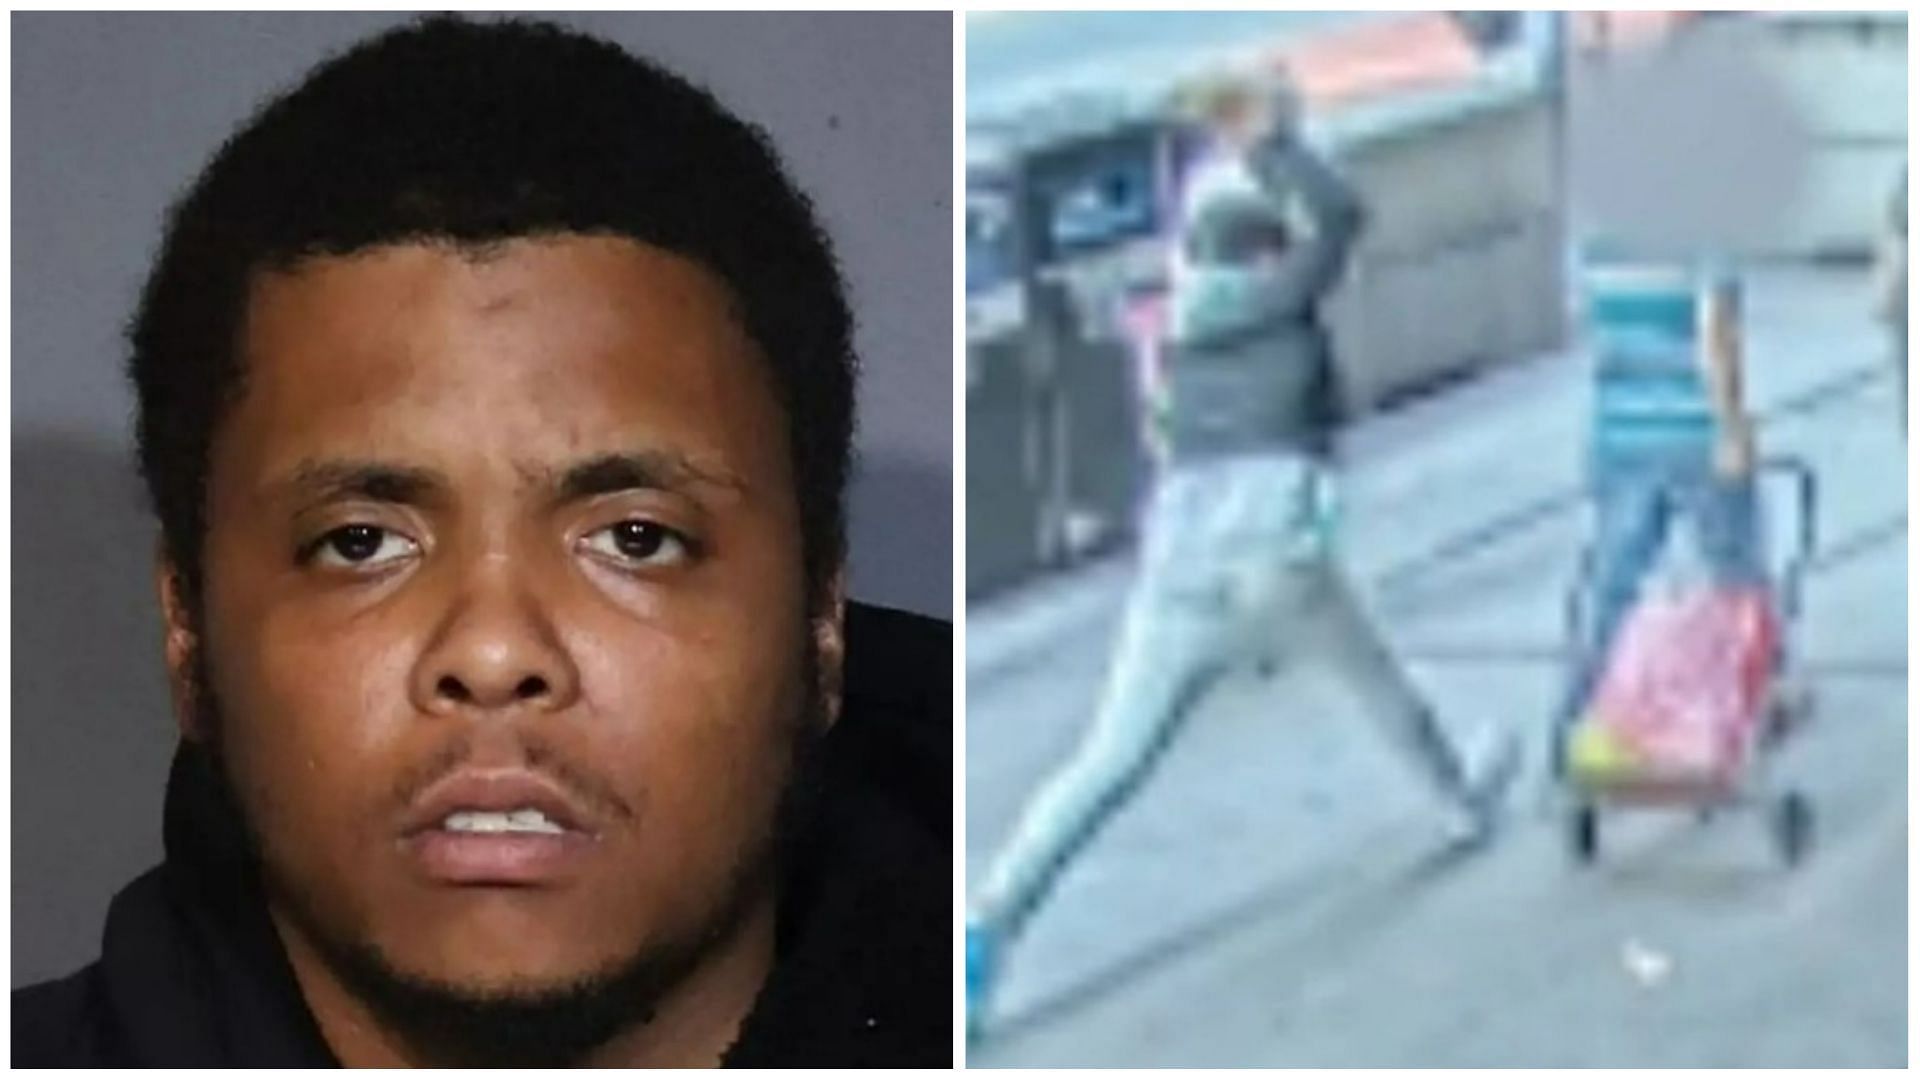 Anthony Evans was charged with hate crime for attacking a 59-year-old Asian woman (Images via NYPD)